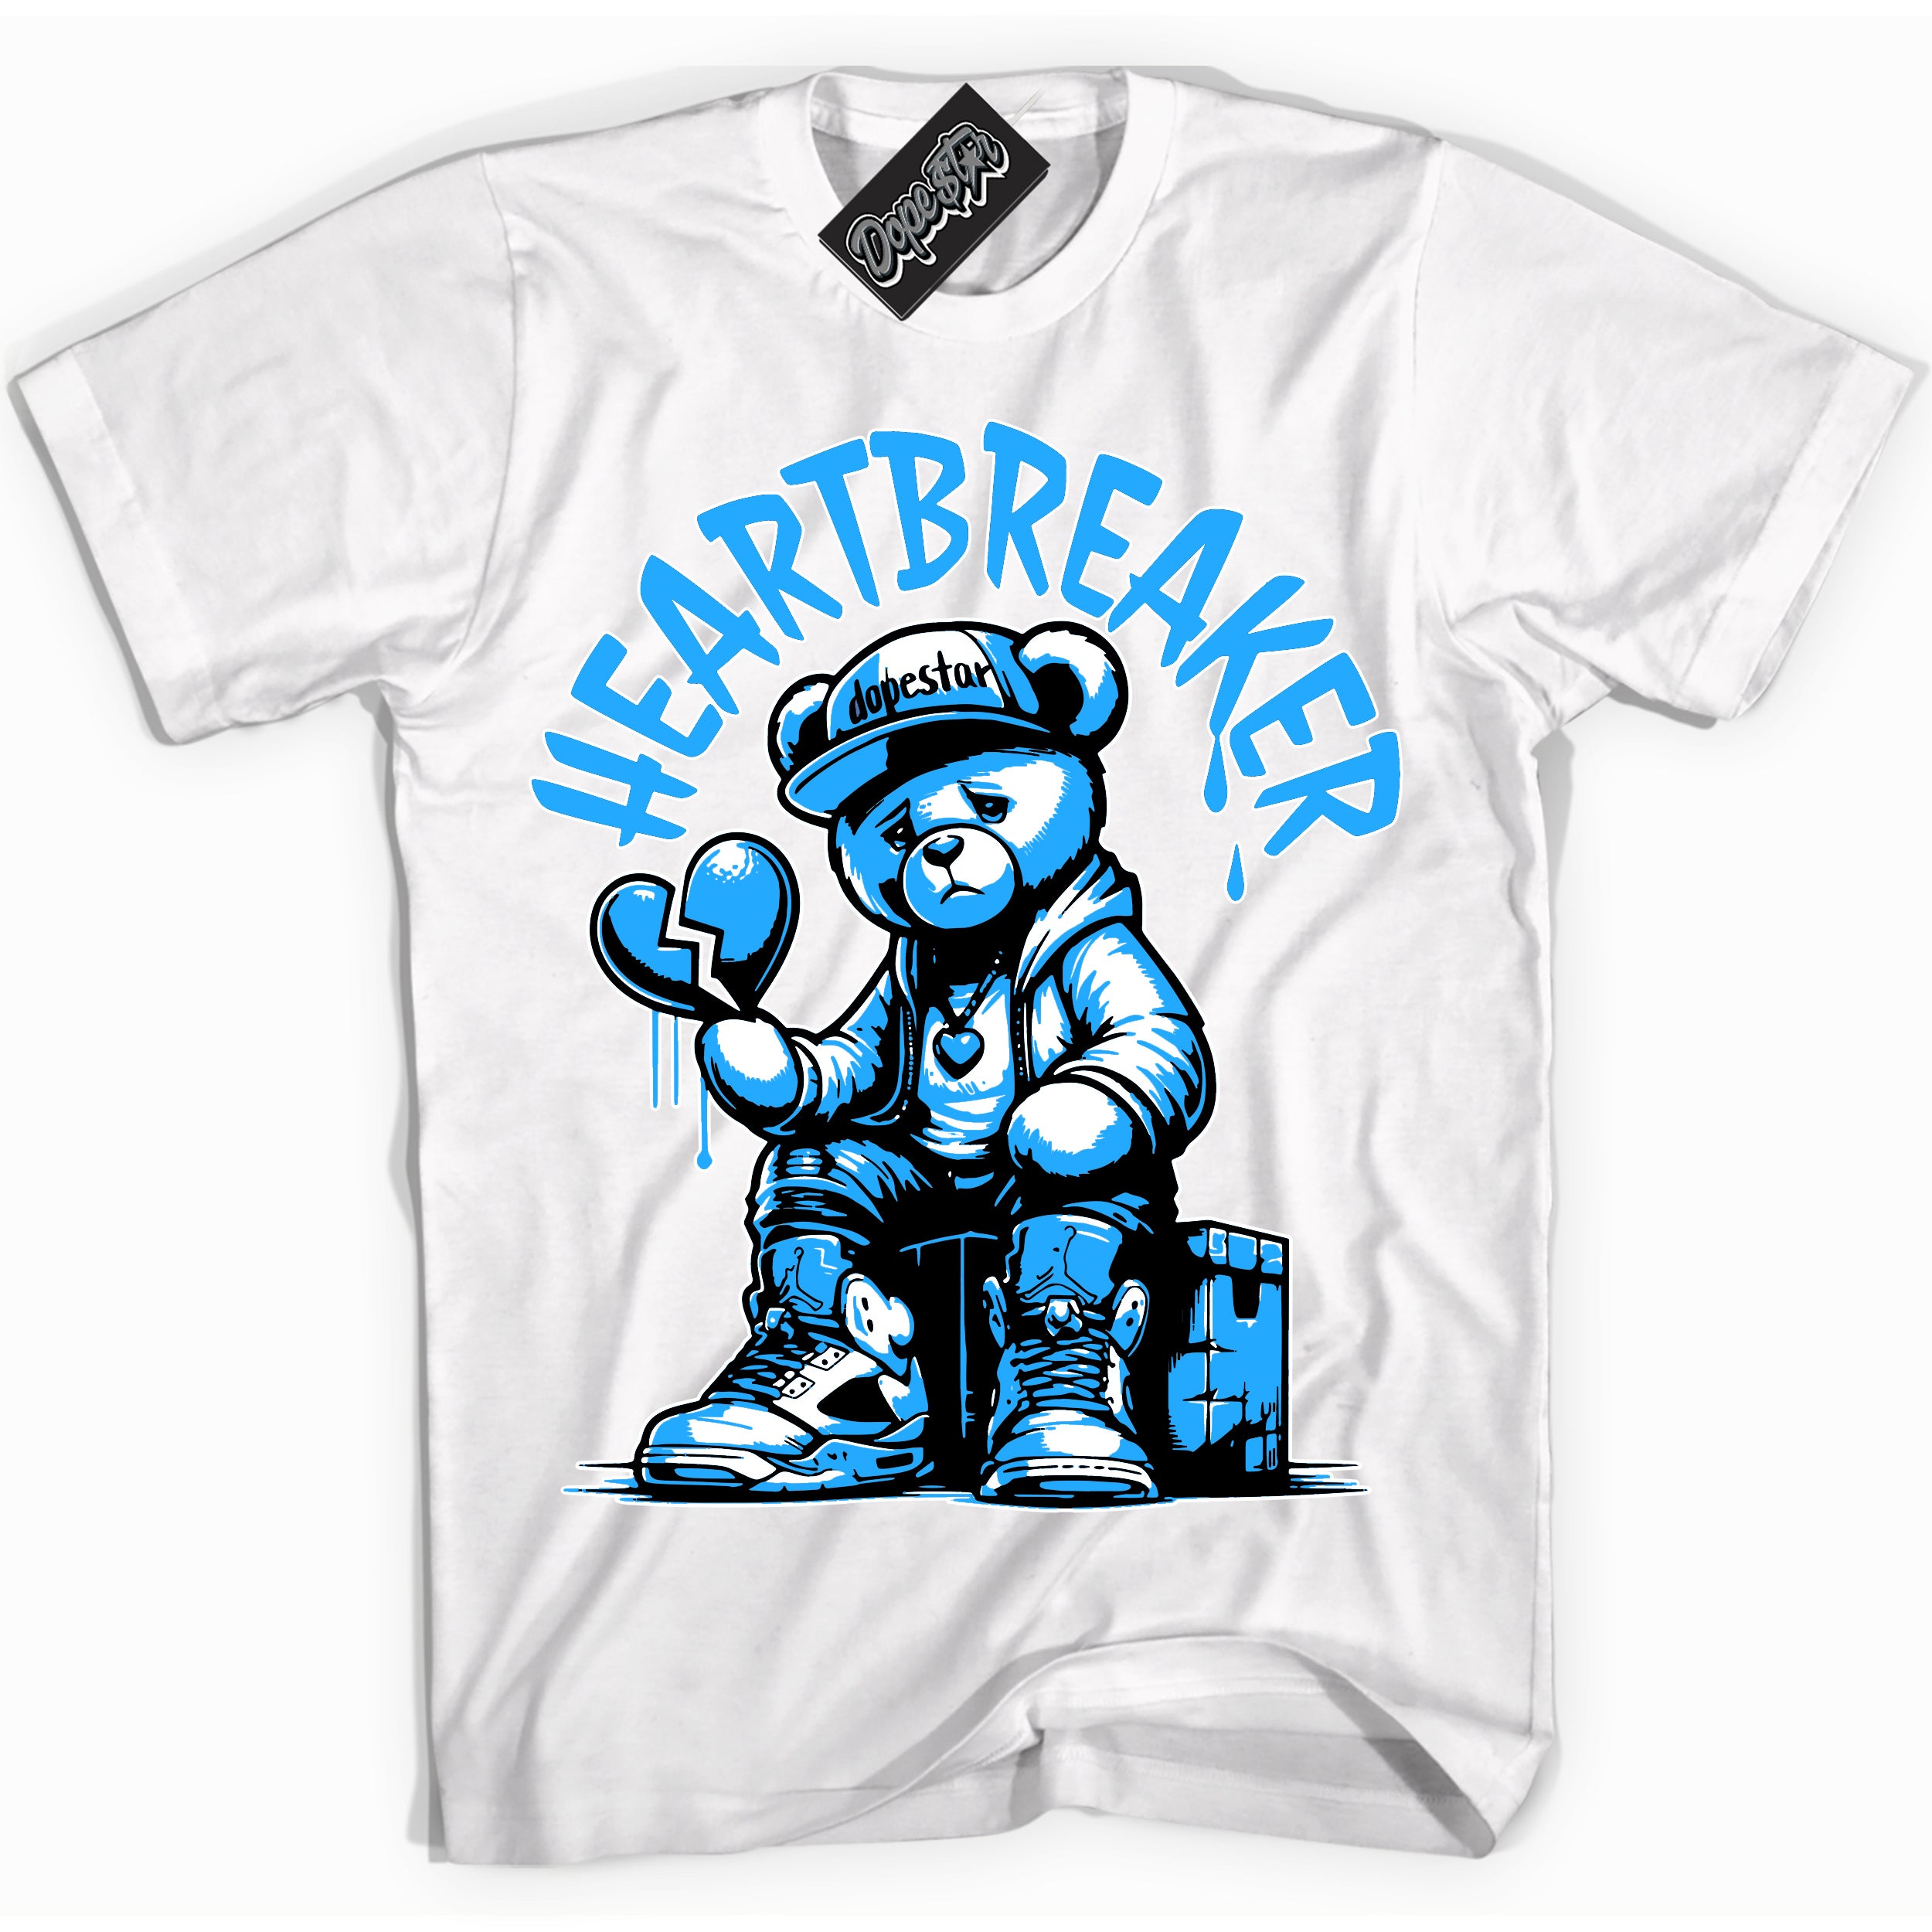 Cool White graphic tee with “ Heartbreaker Bear ” design, that perfectly matches Powder Blue 9s sneakers 